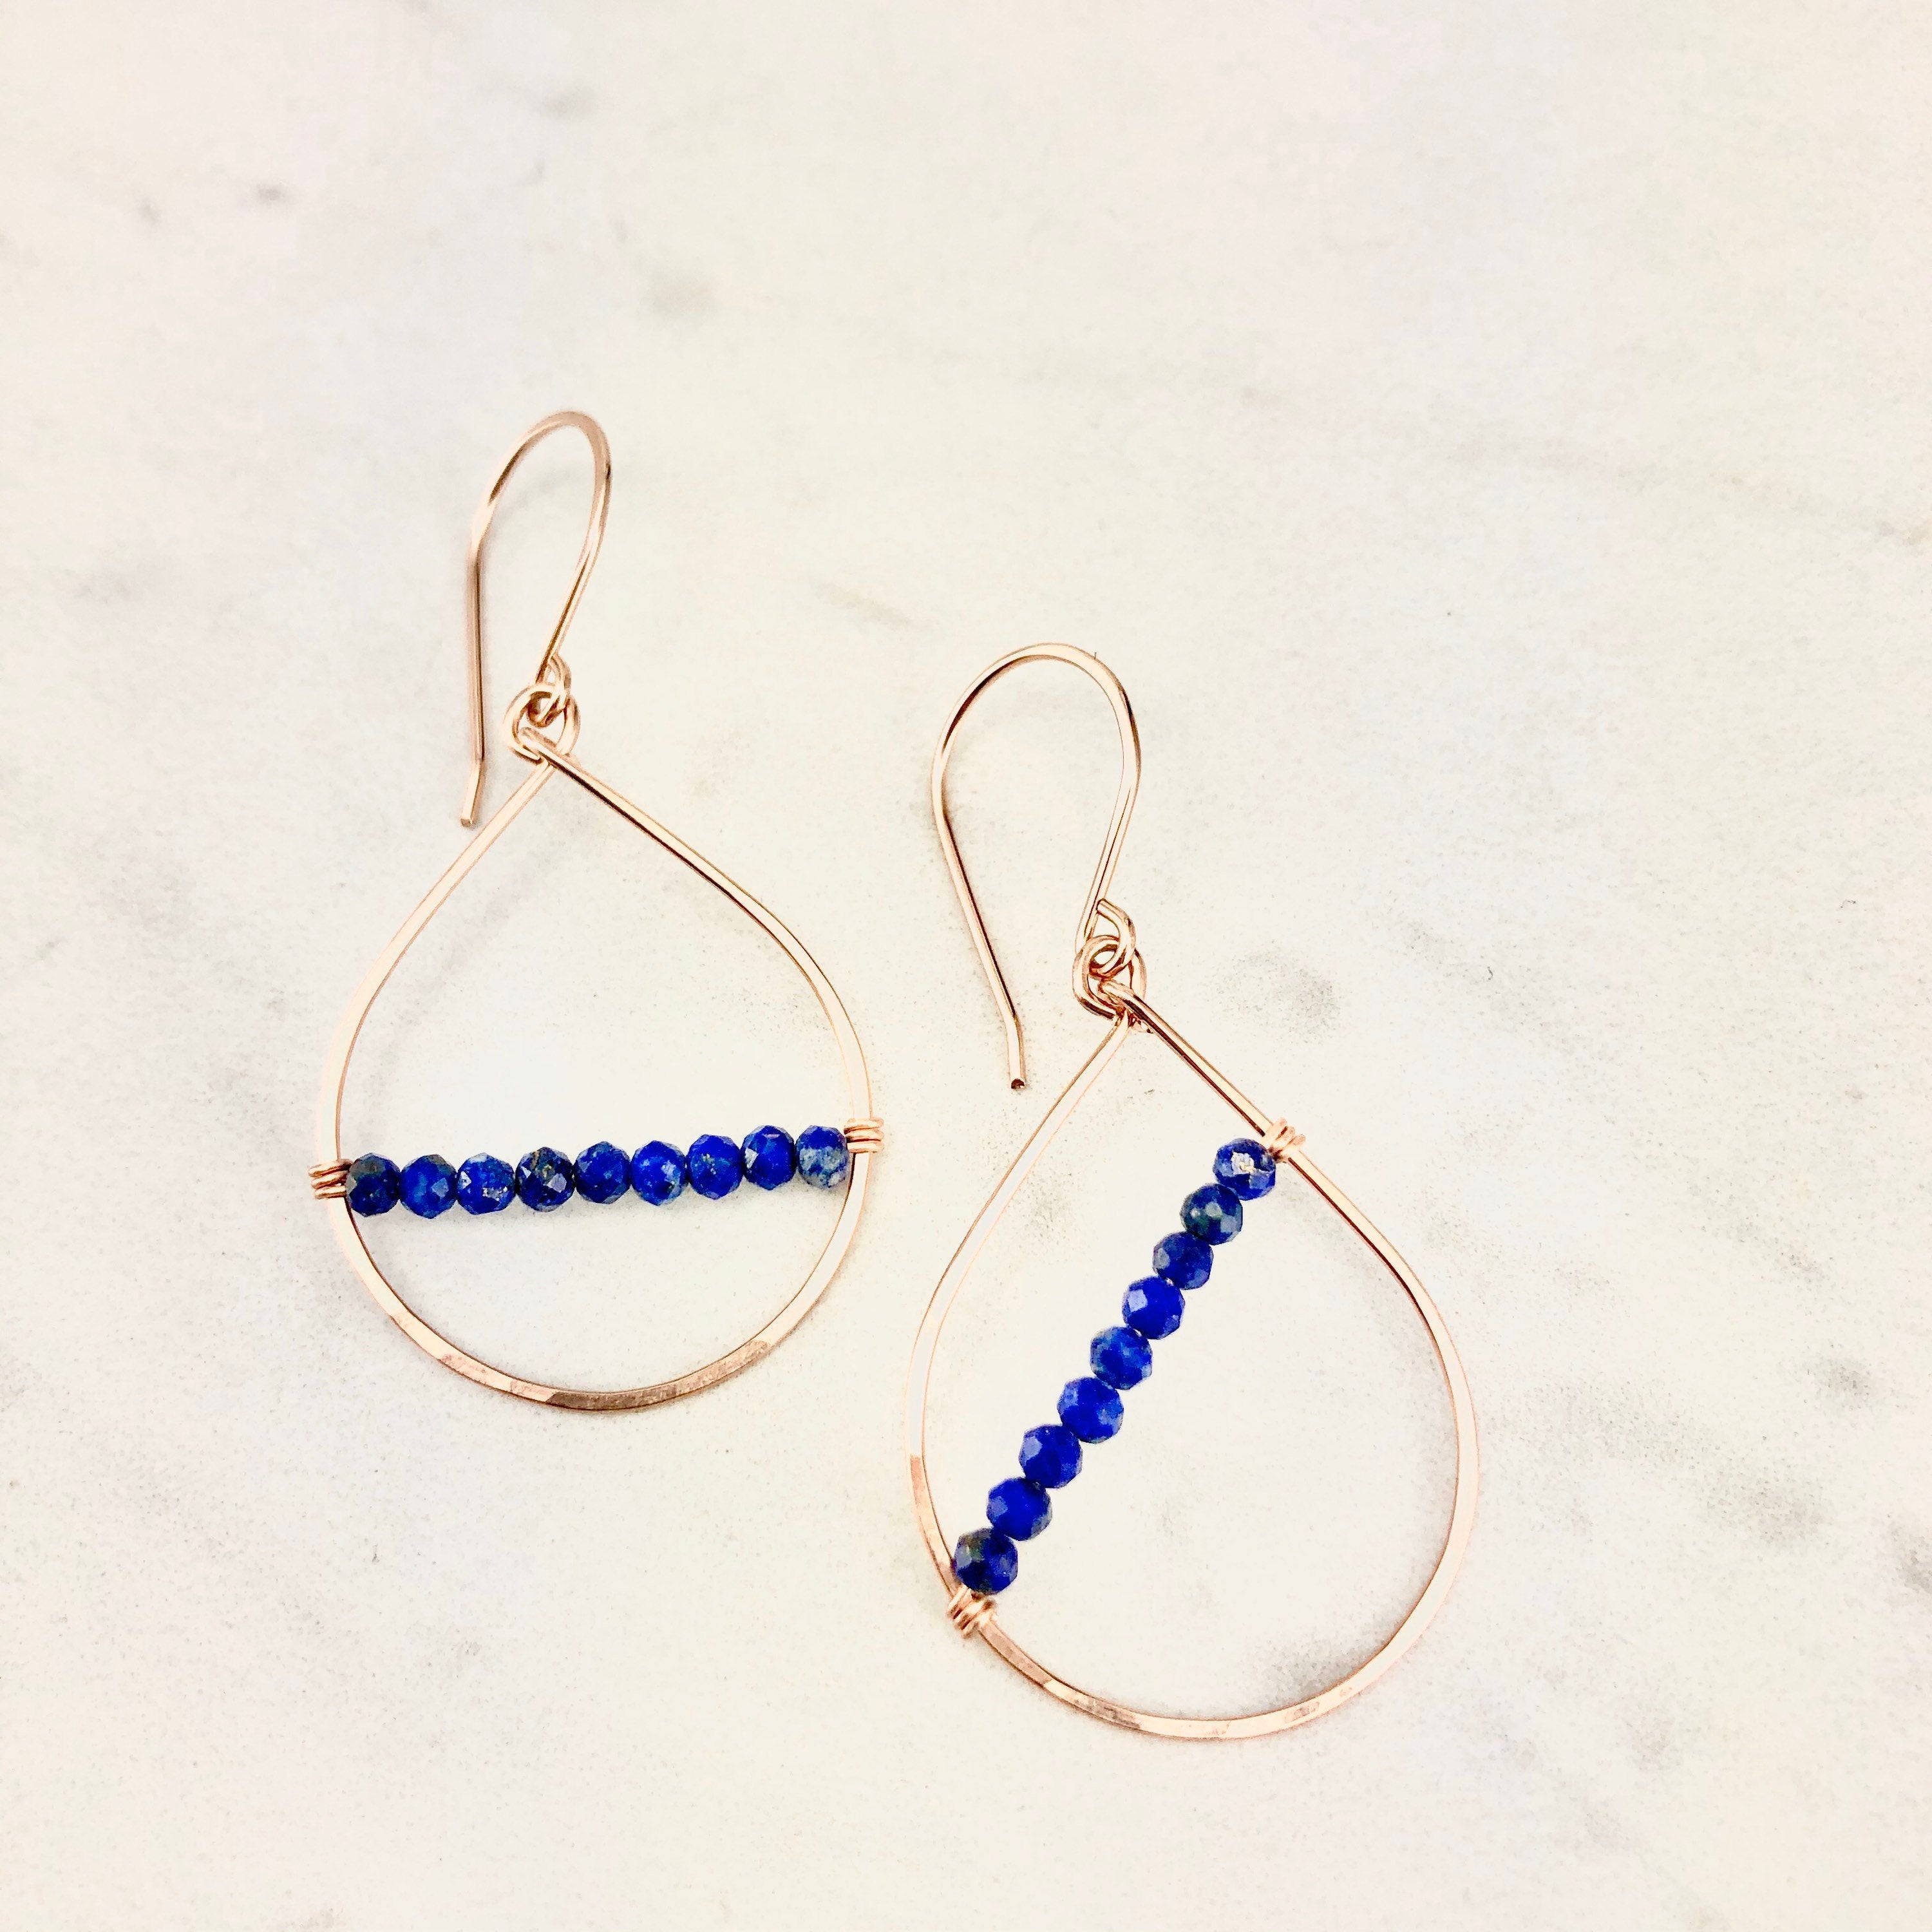 Small Rose Gold and Lapis Teardrop Earrings